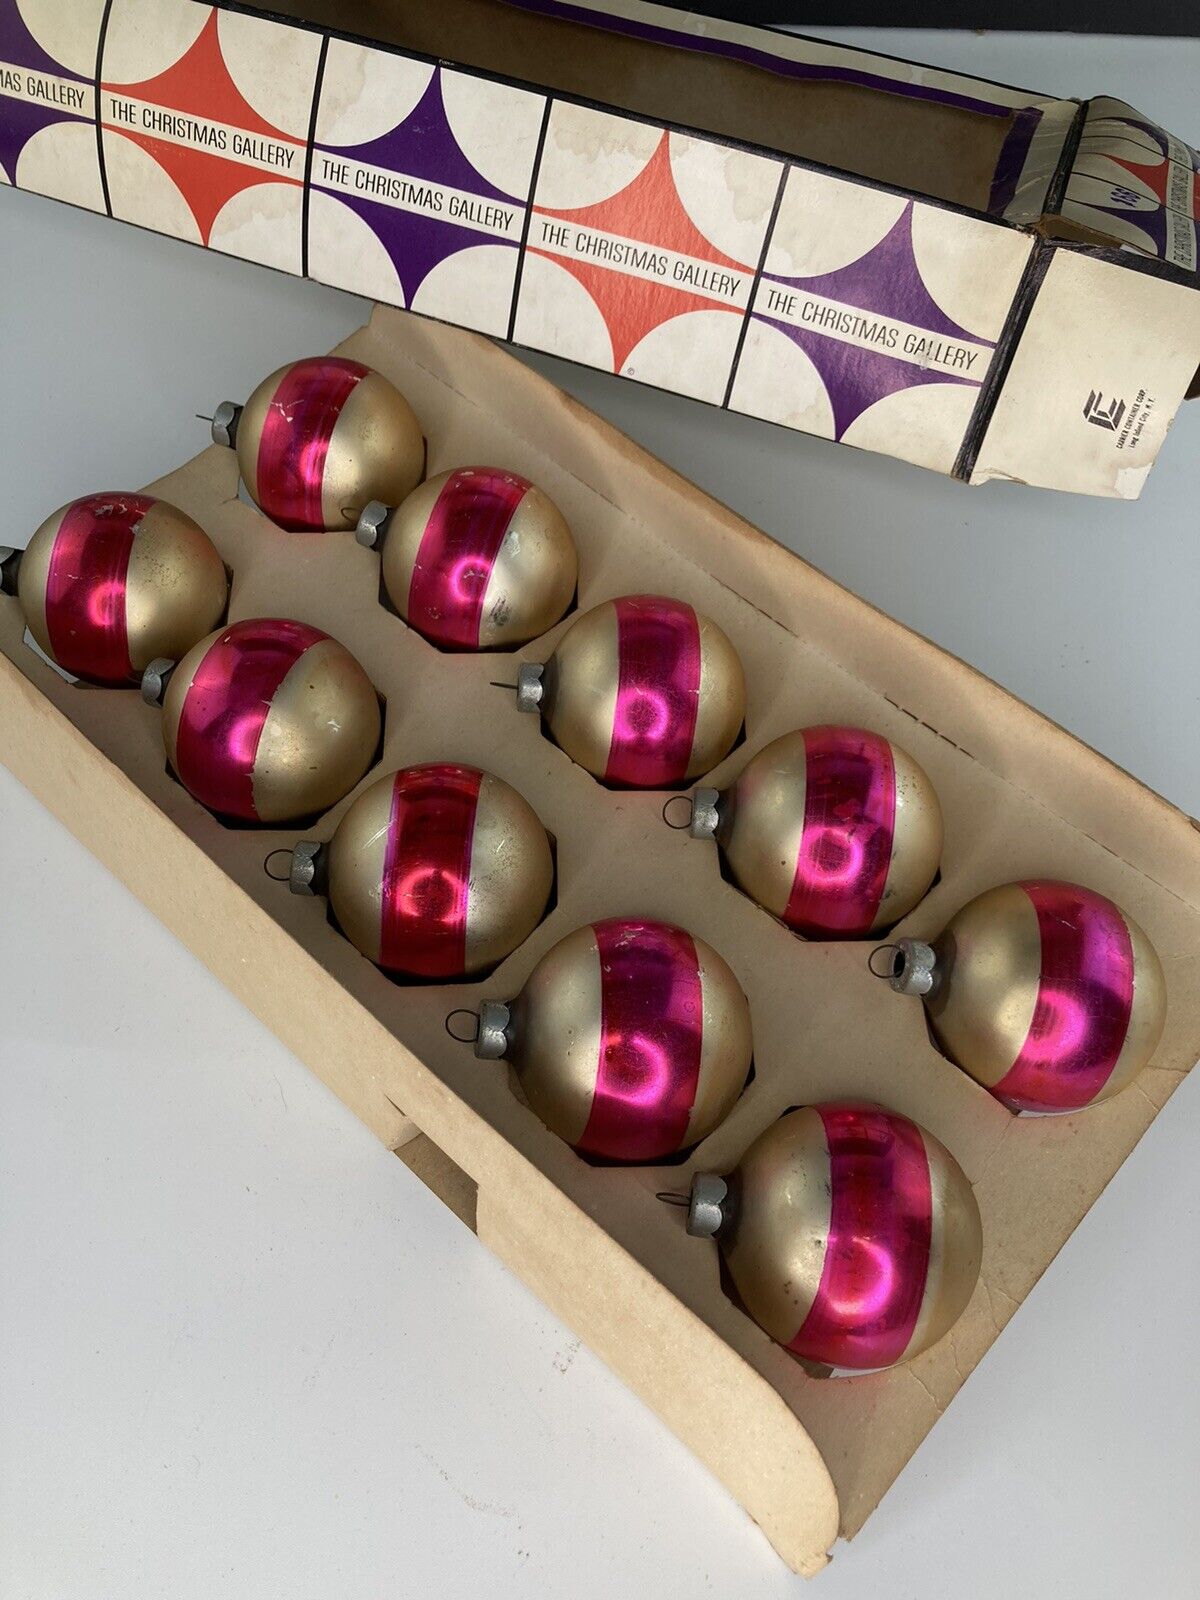 10 Vintage CORNING  Christmas Balls ~ Pink Striped w/ Orig. Box ~ MADE IN USA